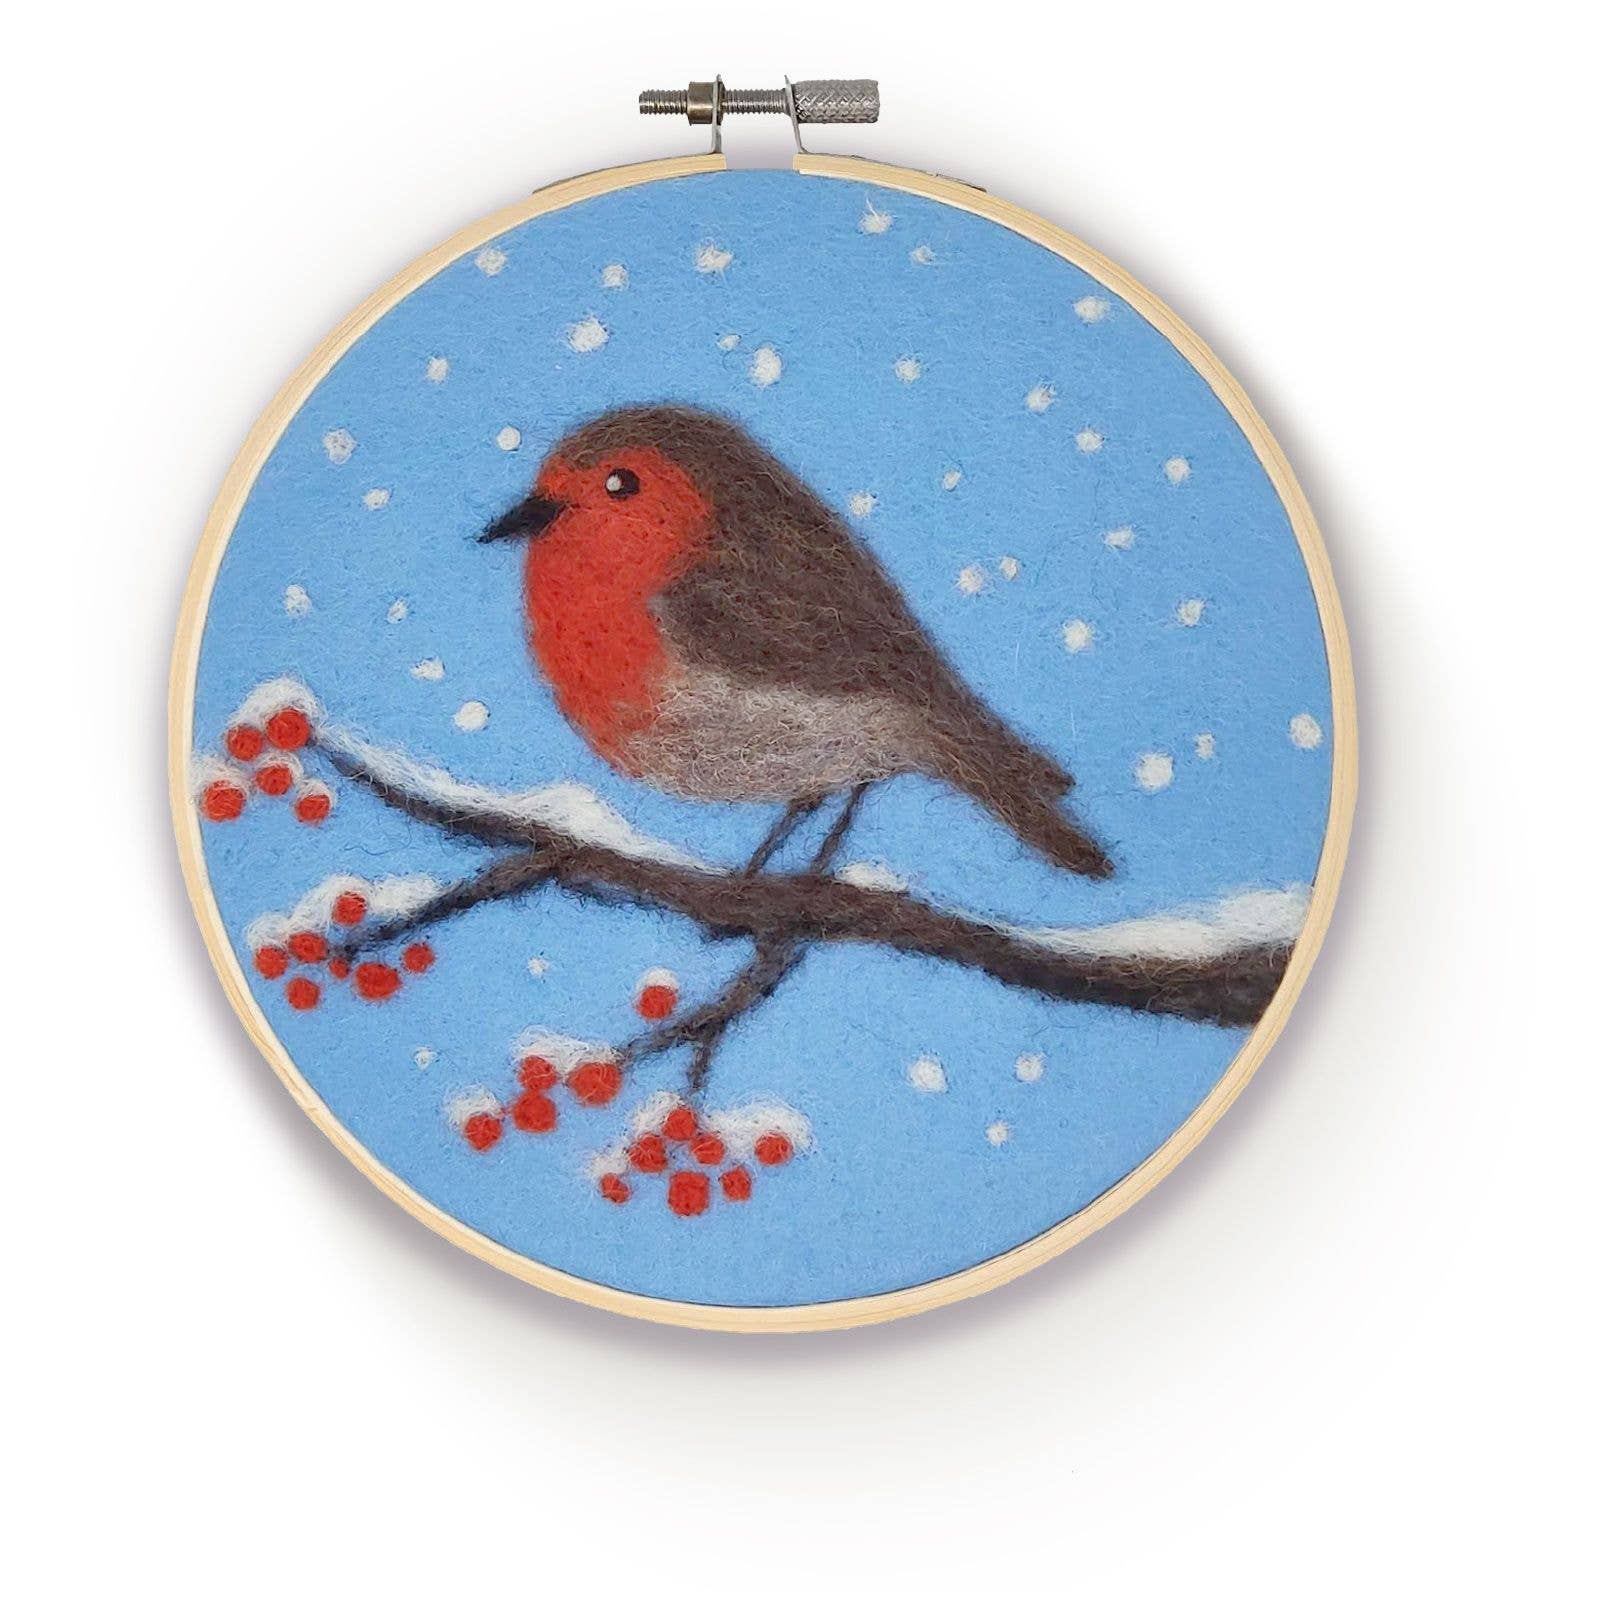 Robin in a Hoop Needle Felt Craft Kit - a great holiday gift